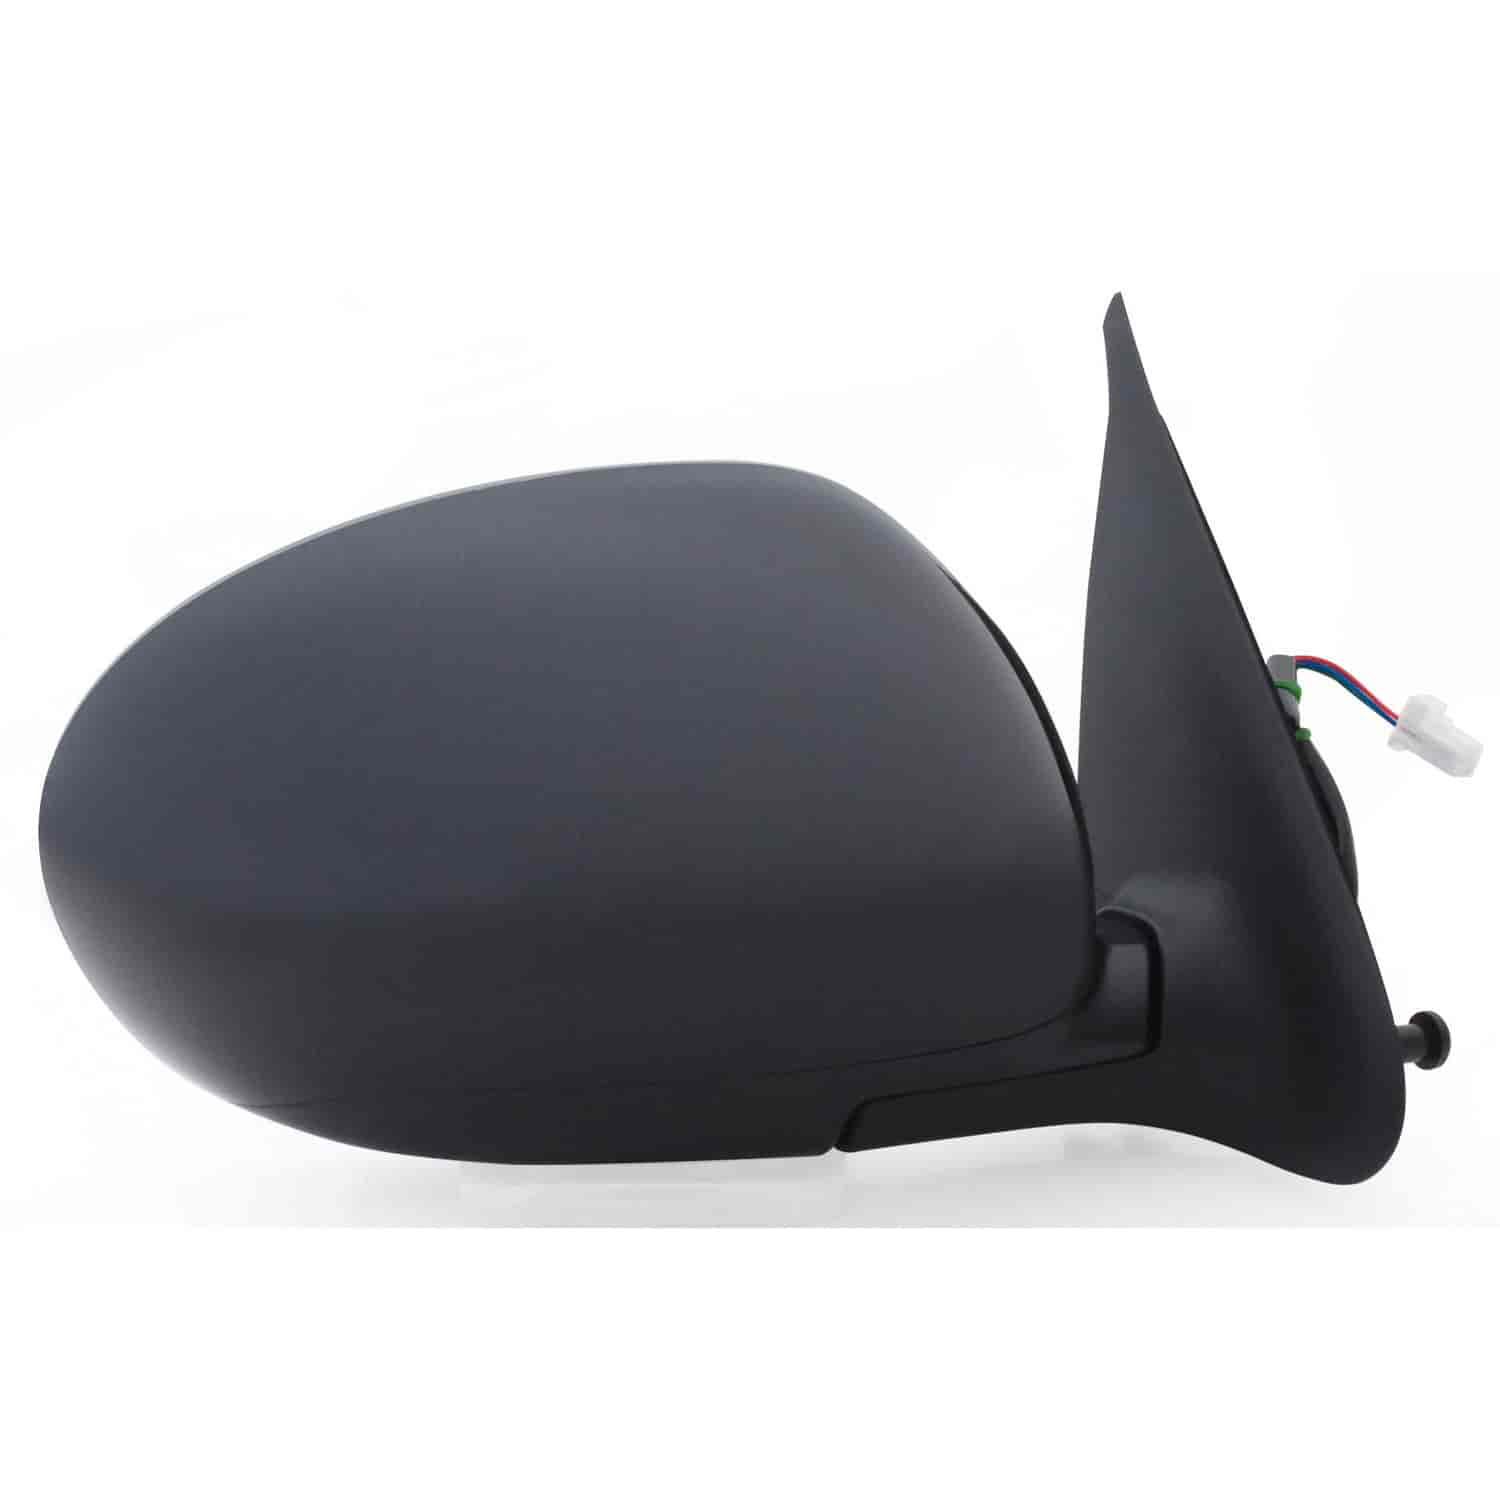 OEM Style Replacement mirror for 11-14 Nissan Juke passenger side mirror tested to fit and function